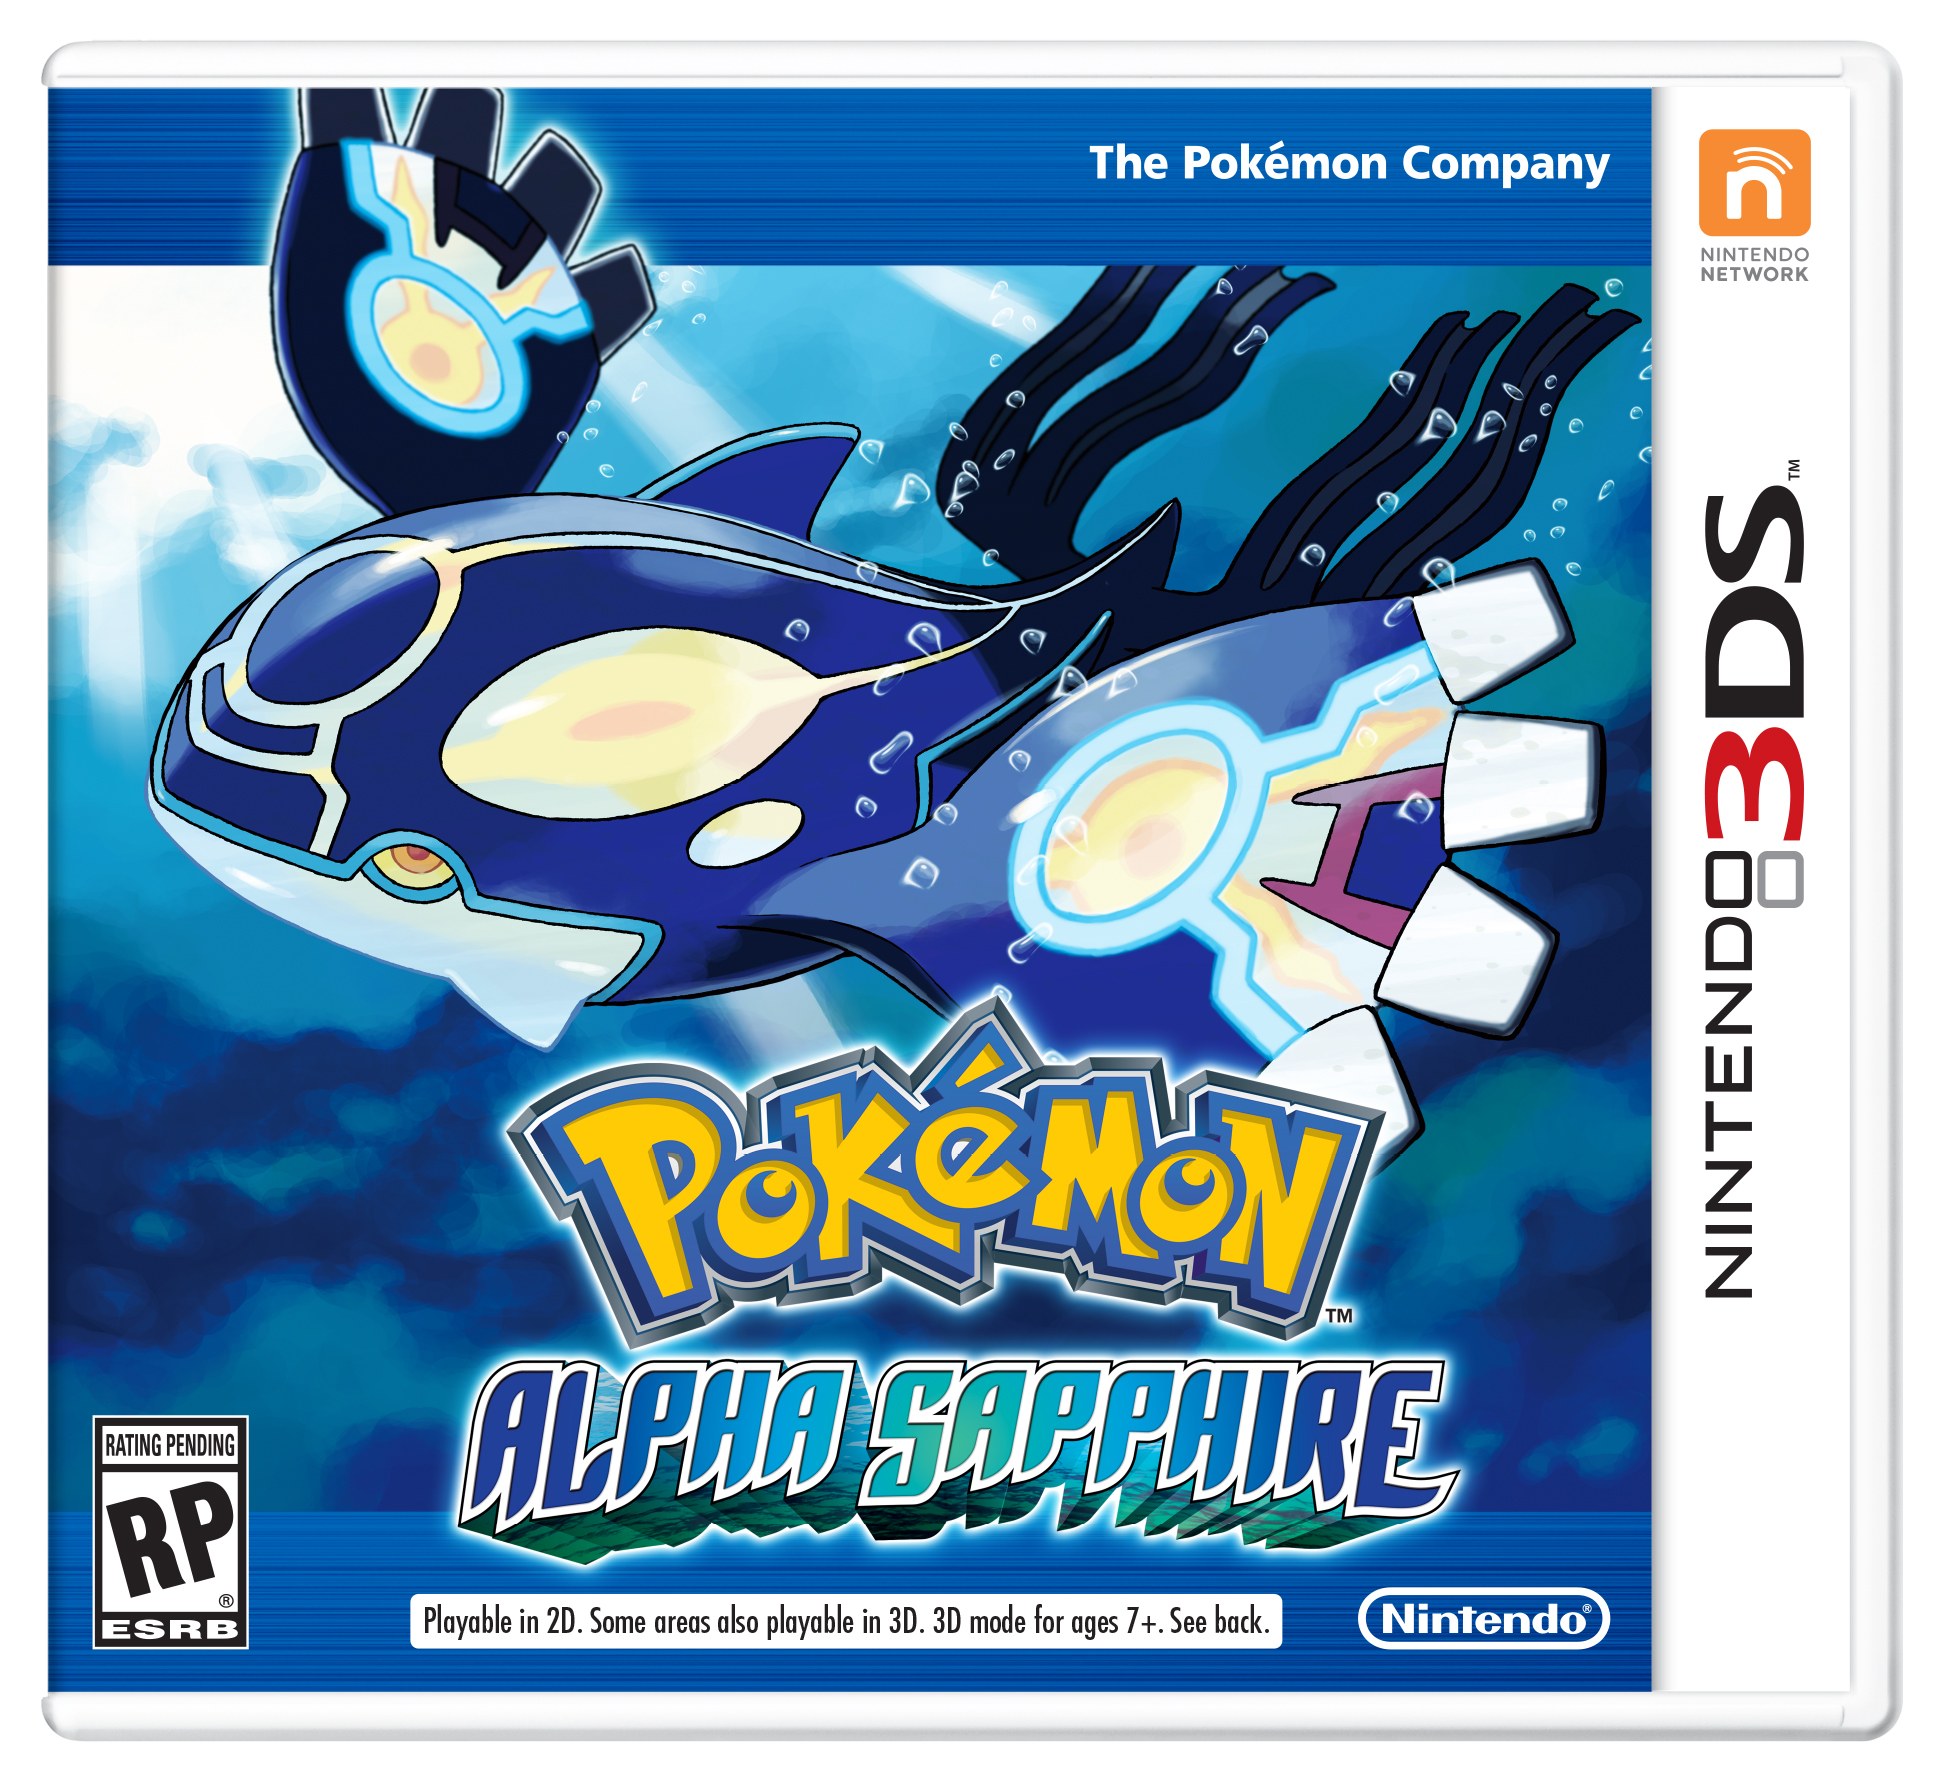 E3 2014: More Pokemon! Omega Ruby and Alpha Sapphire dated